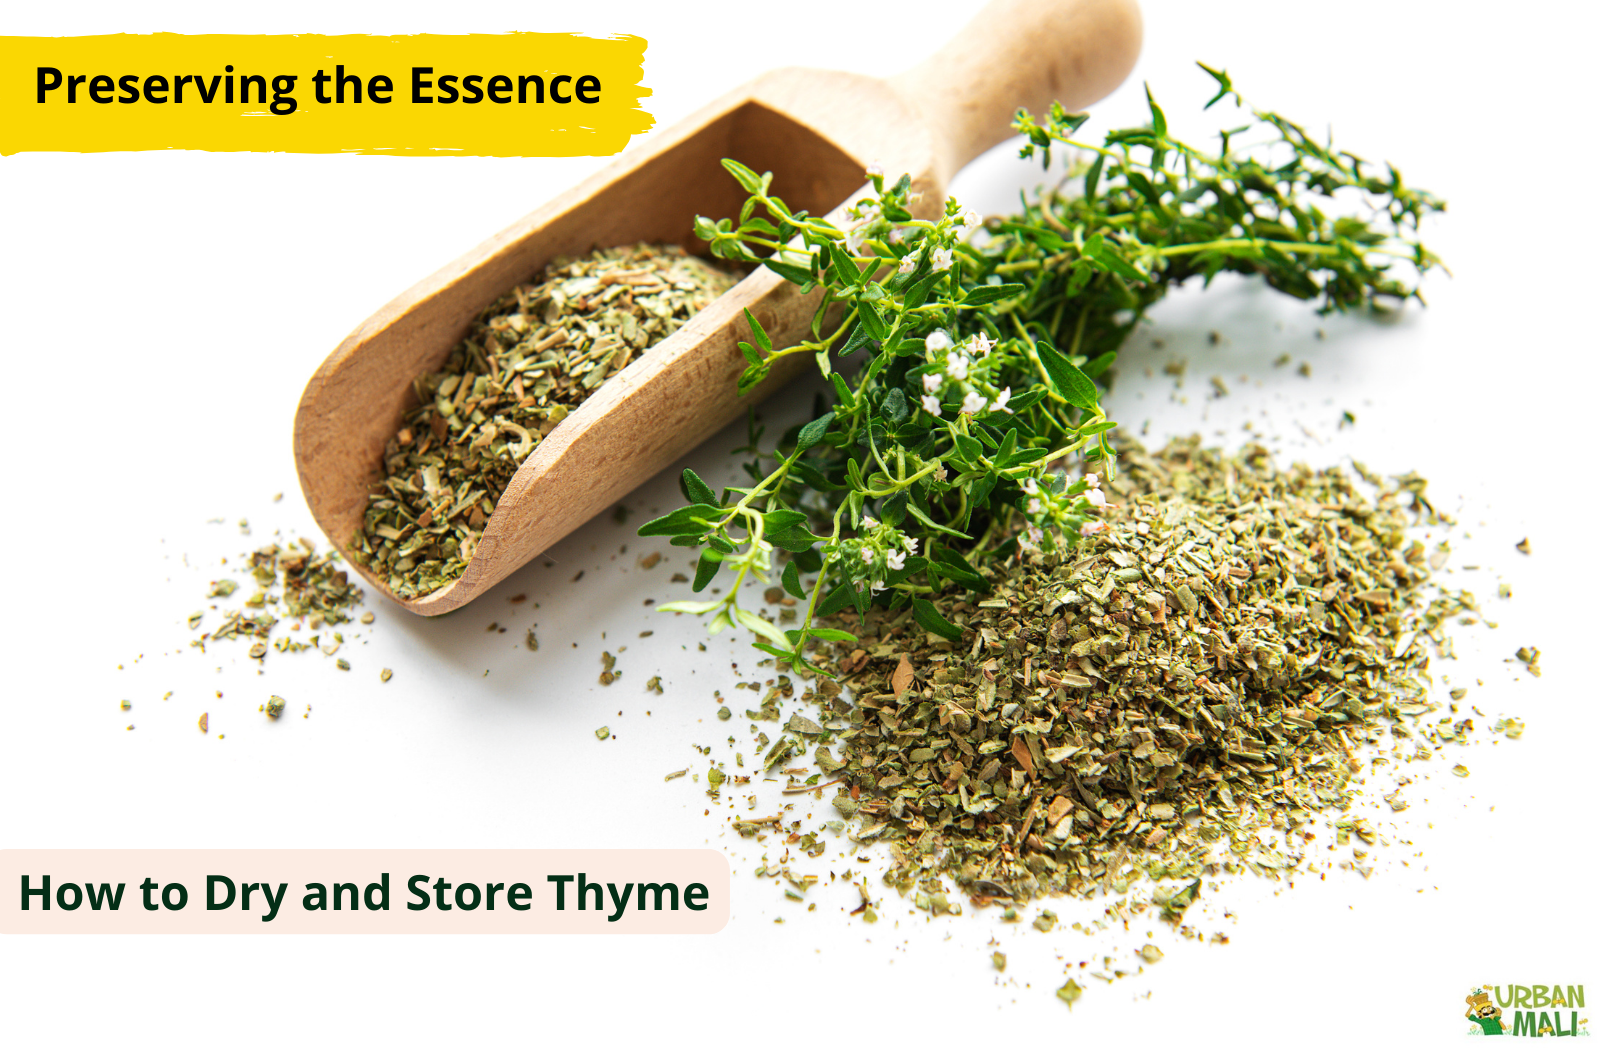 Preserving the Essence: How to Dry and Store Thyme